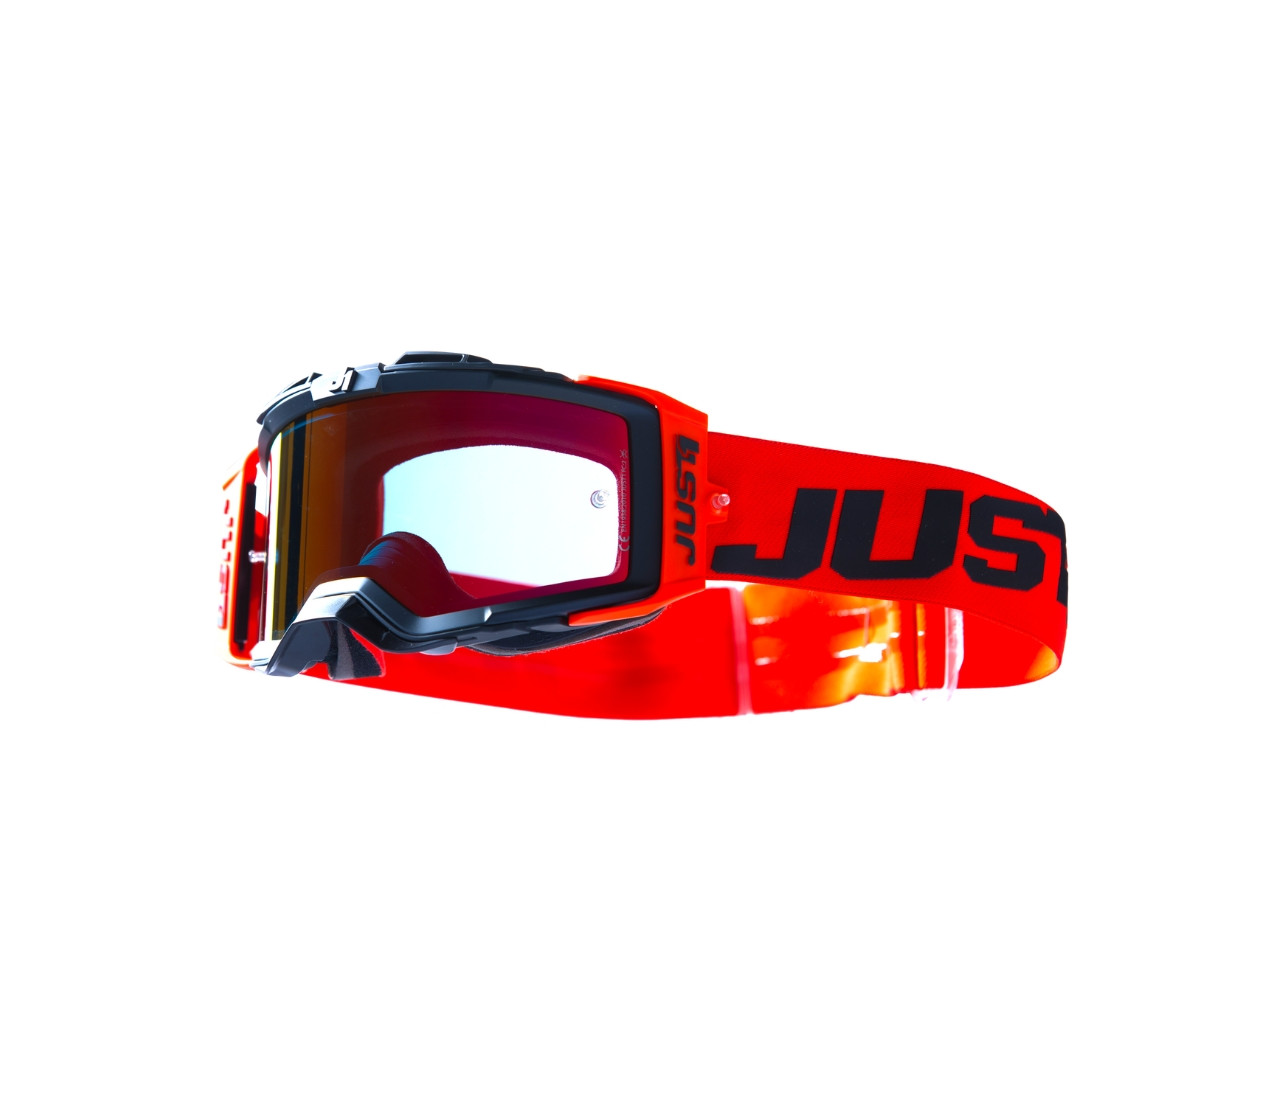 JUST1 NERVE ABSOLUTE BLACK - RED MIRROR RED LENS